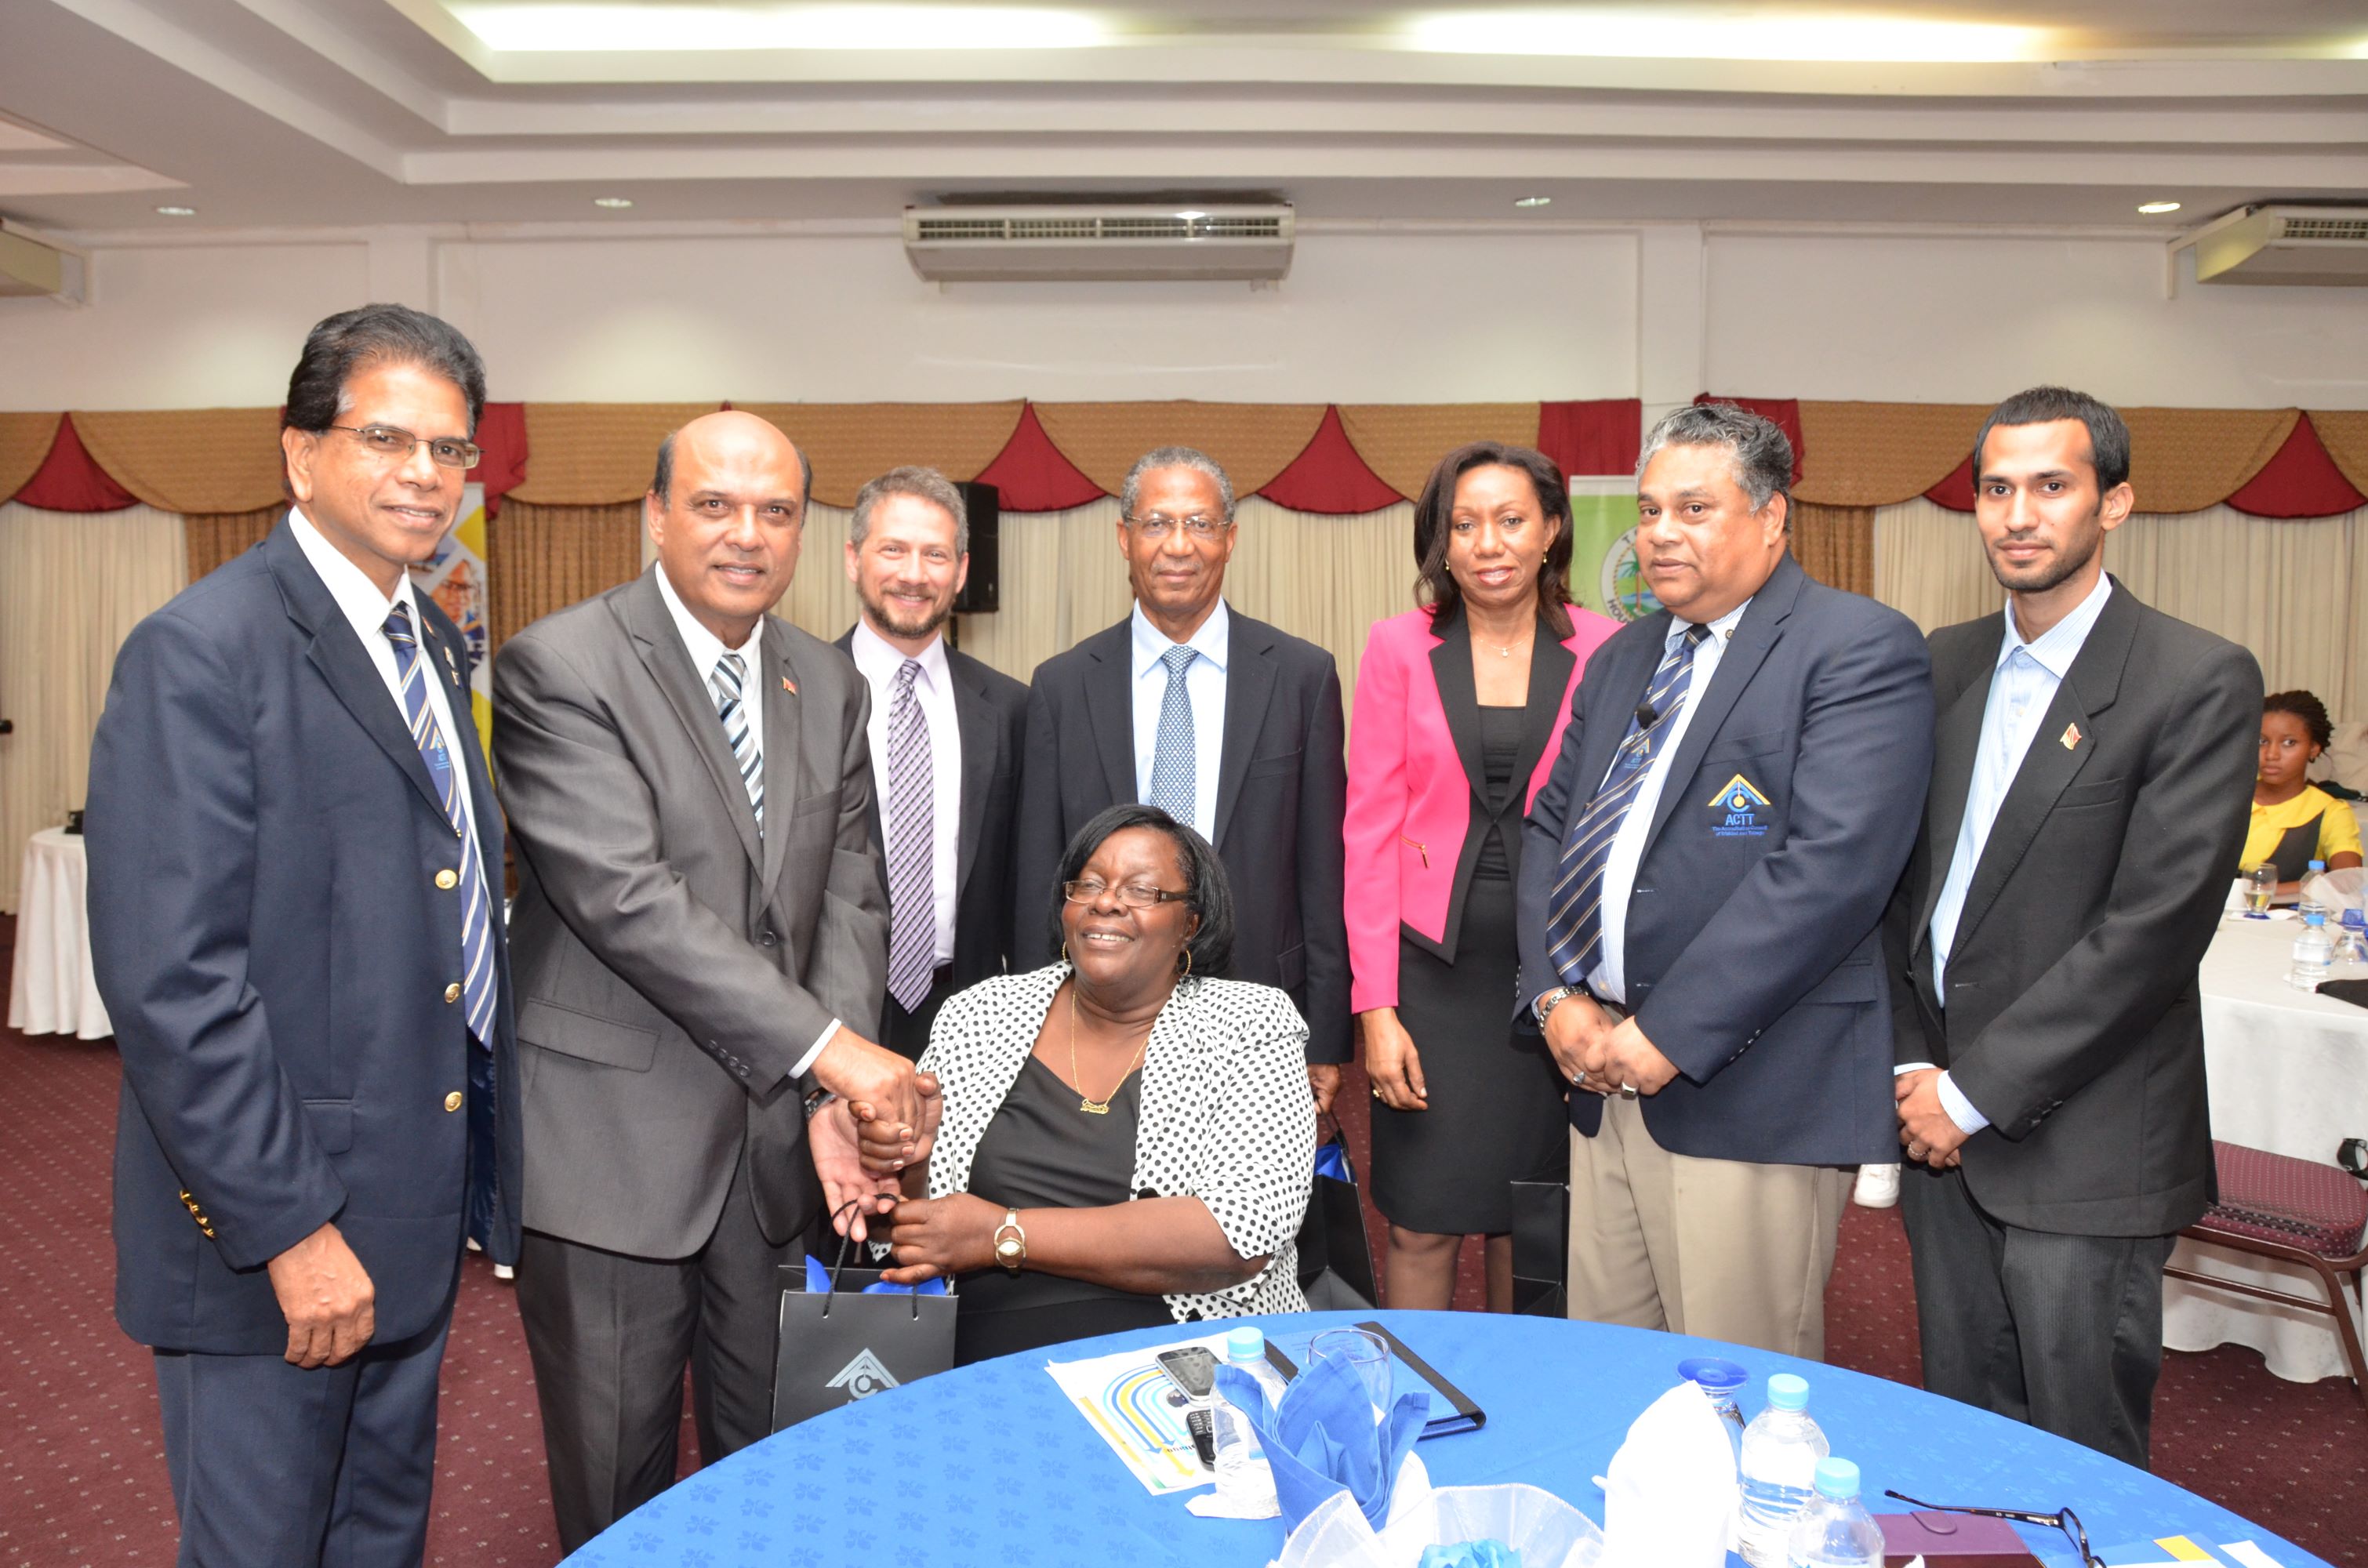 First Tobago Symposium - A Vision for Higher Education